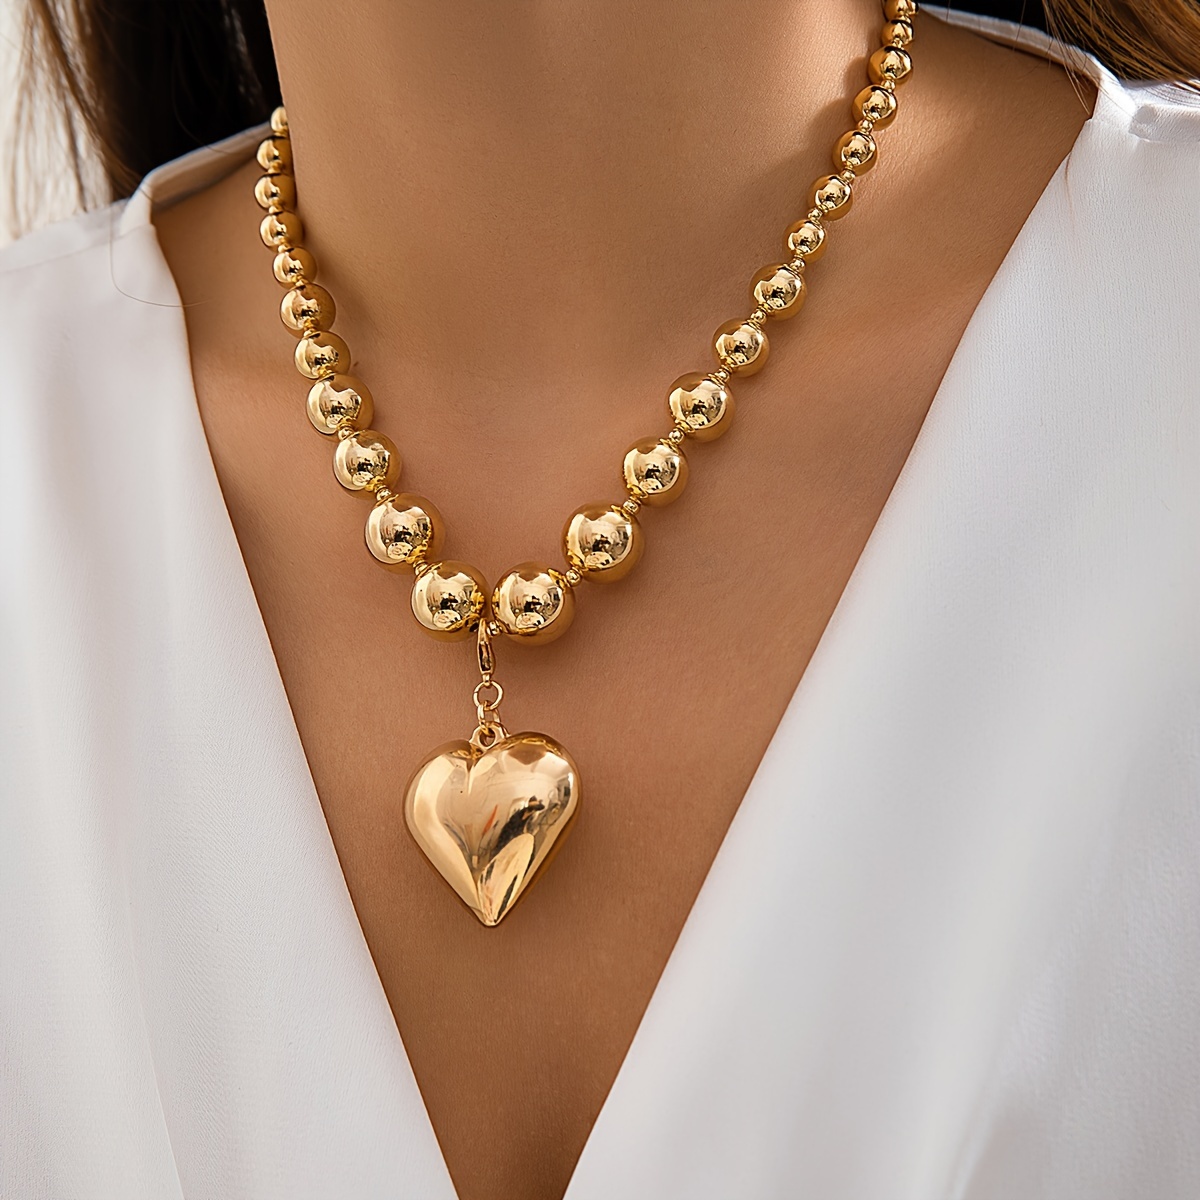 

Statement Style Necklace Large Round Bead Punk Style Golden Silvery Collar Clavicle Chain Geometric Bead Heart Pendant Necklace For Women